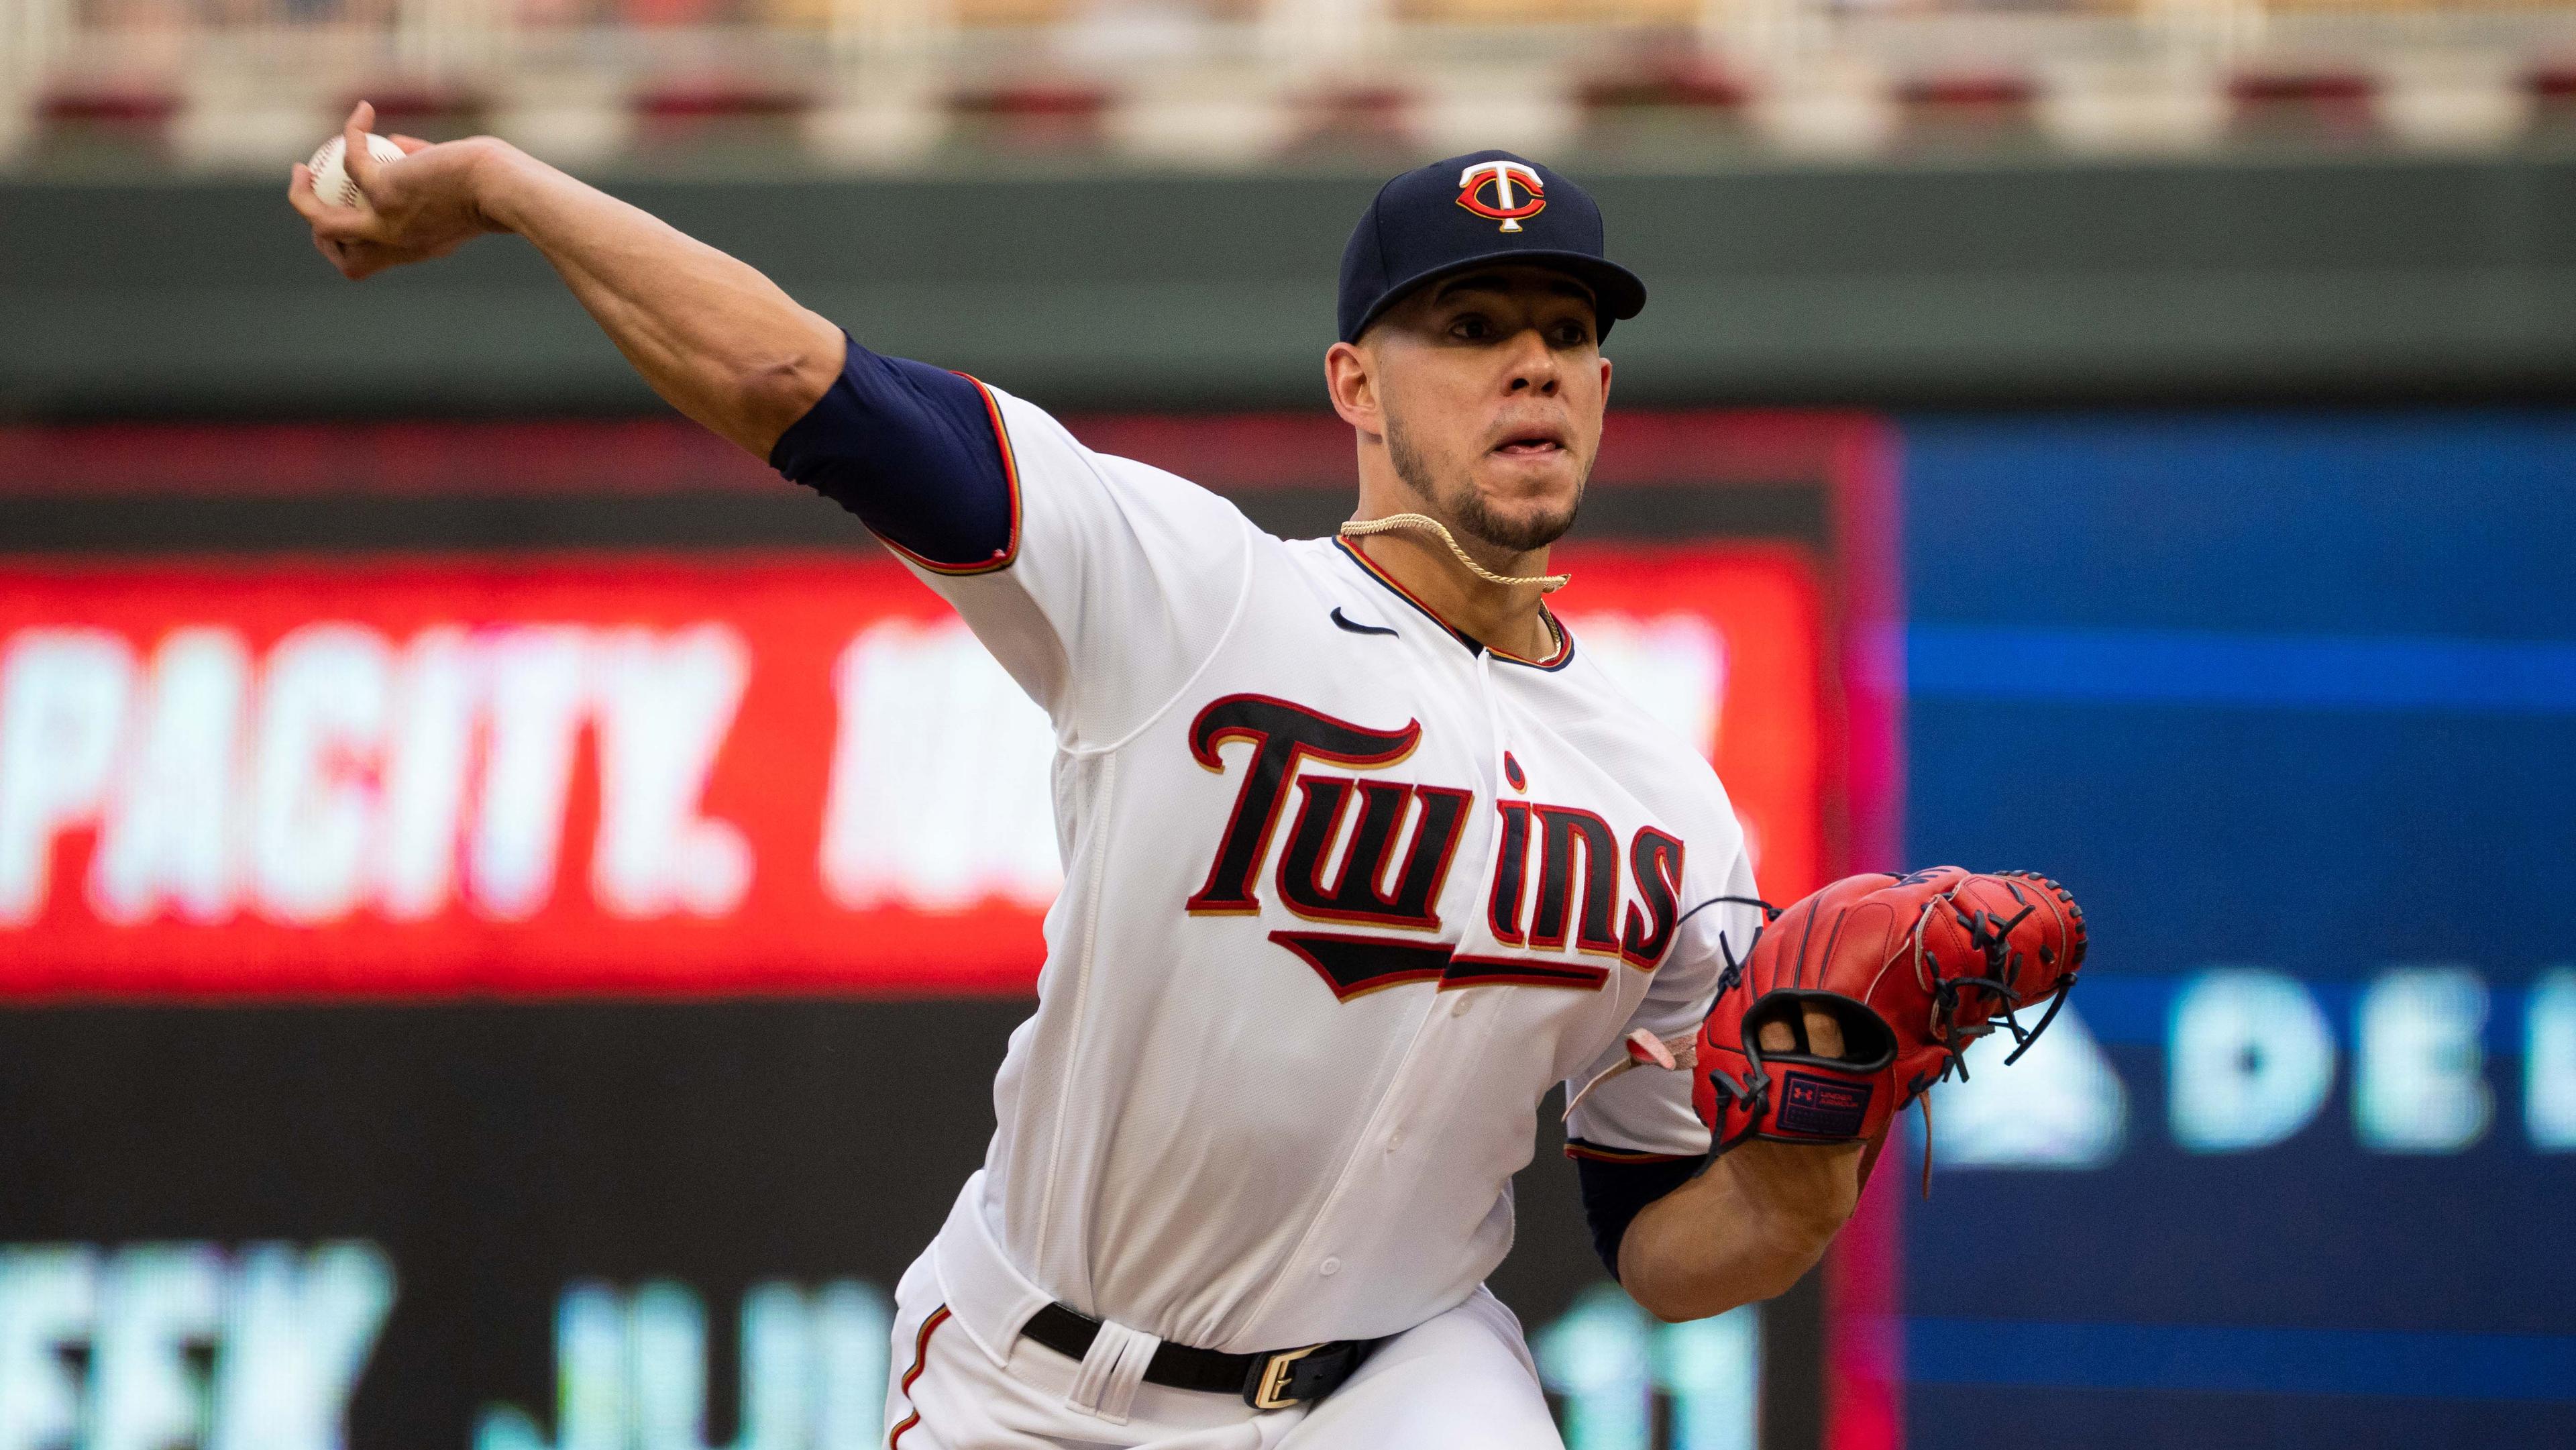 Minnesota Twins starting pitcher Jose Berrios (17) pitches against the Cleveland Indians in the second inning at Target Field. / Brad Rempel - USA TODAY Sports